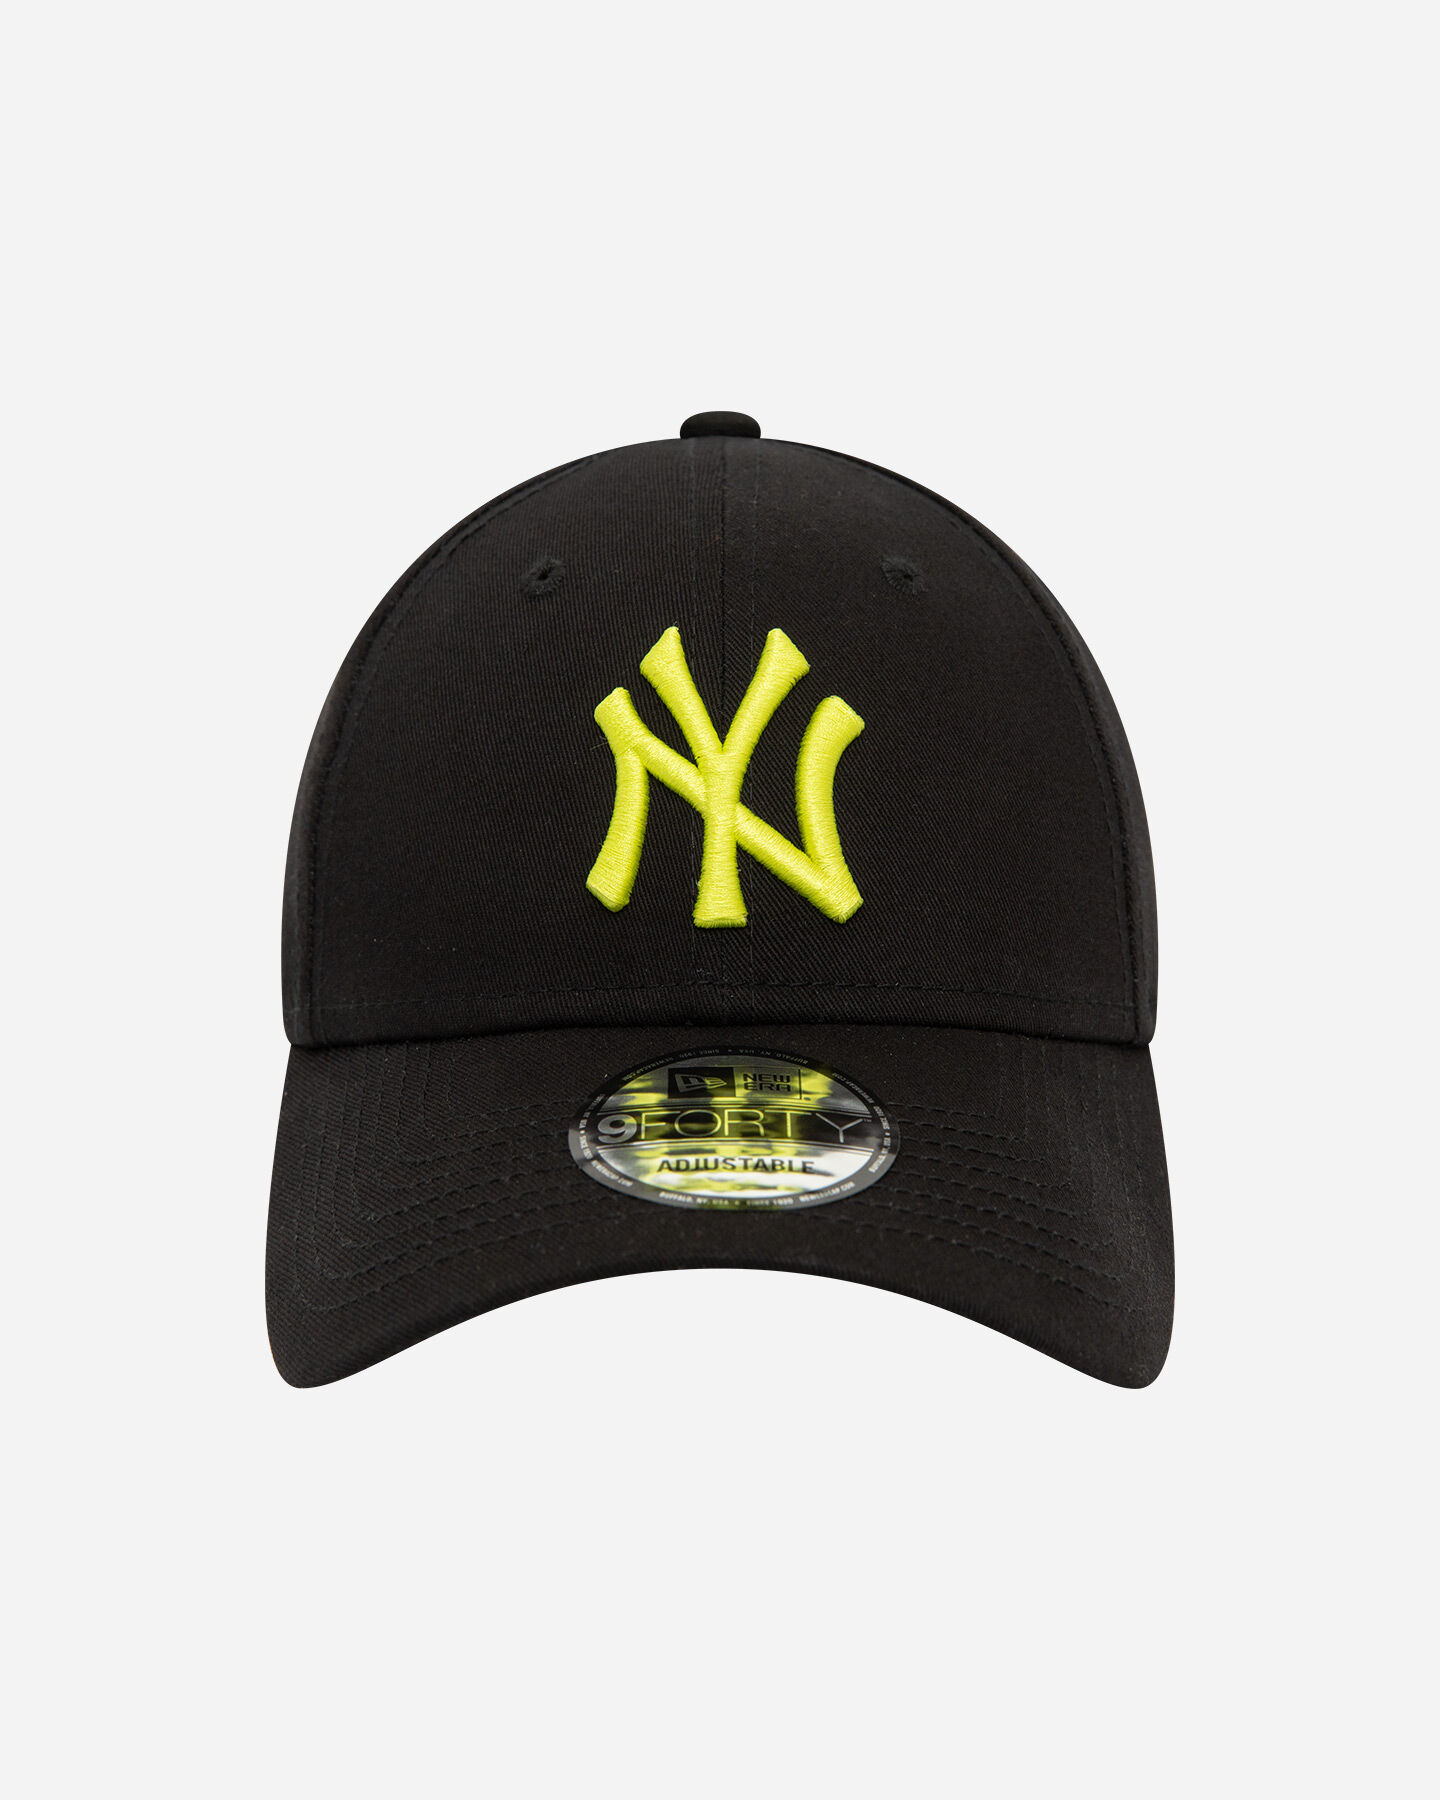  Cappellino NEW ERA 9FORTY MLB LEAGUE ESSENTIAL NEW YORK YANKEES M S5671048|001|OSFM scatto 1